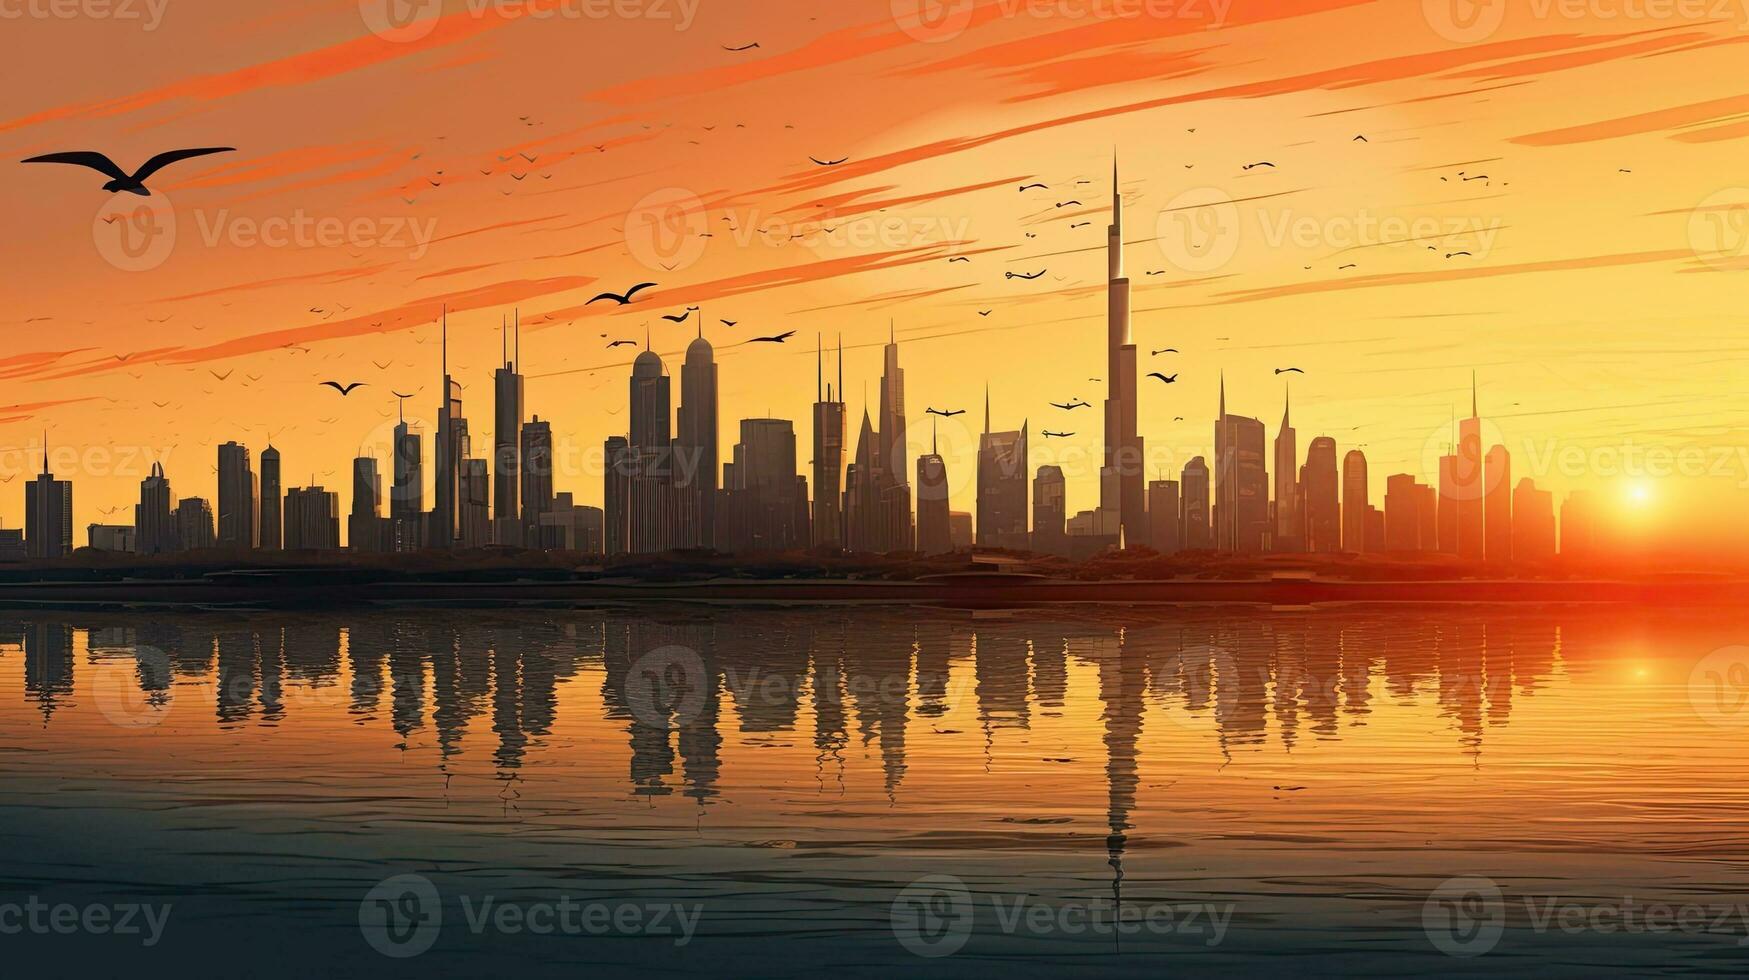 In the United Arab Emirates the captivating city of Dubai showcases a remarkable city center skyline and renowned Jumeirah beach during sunset photo